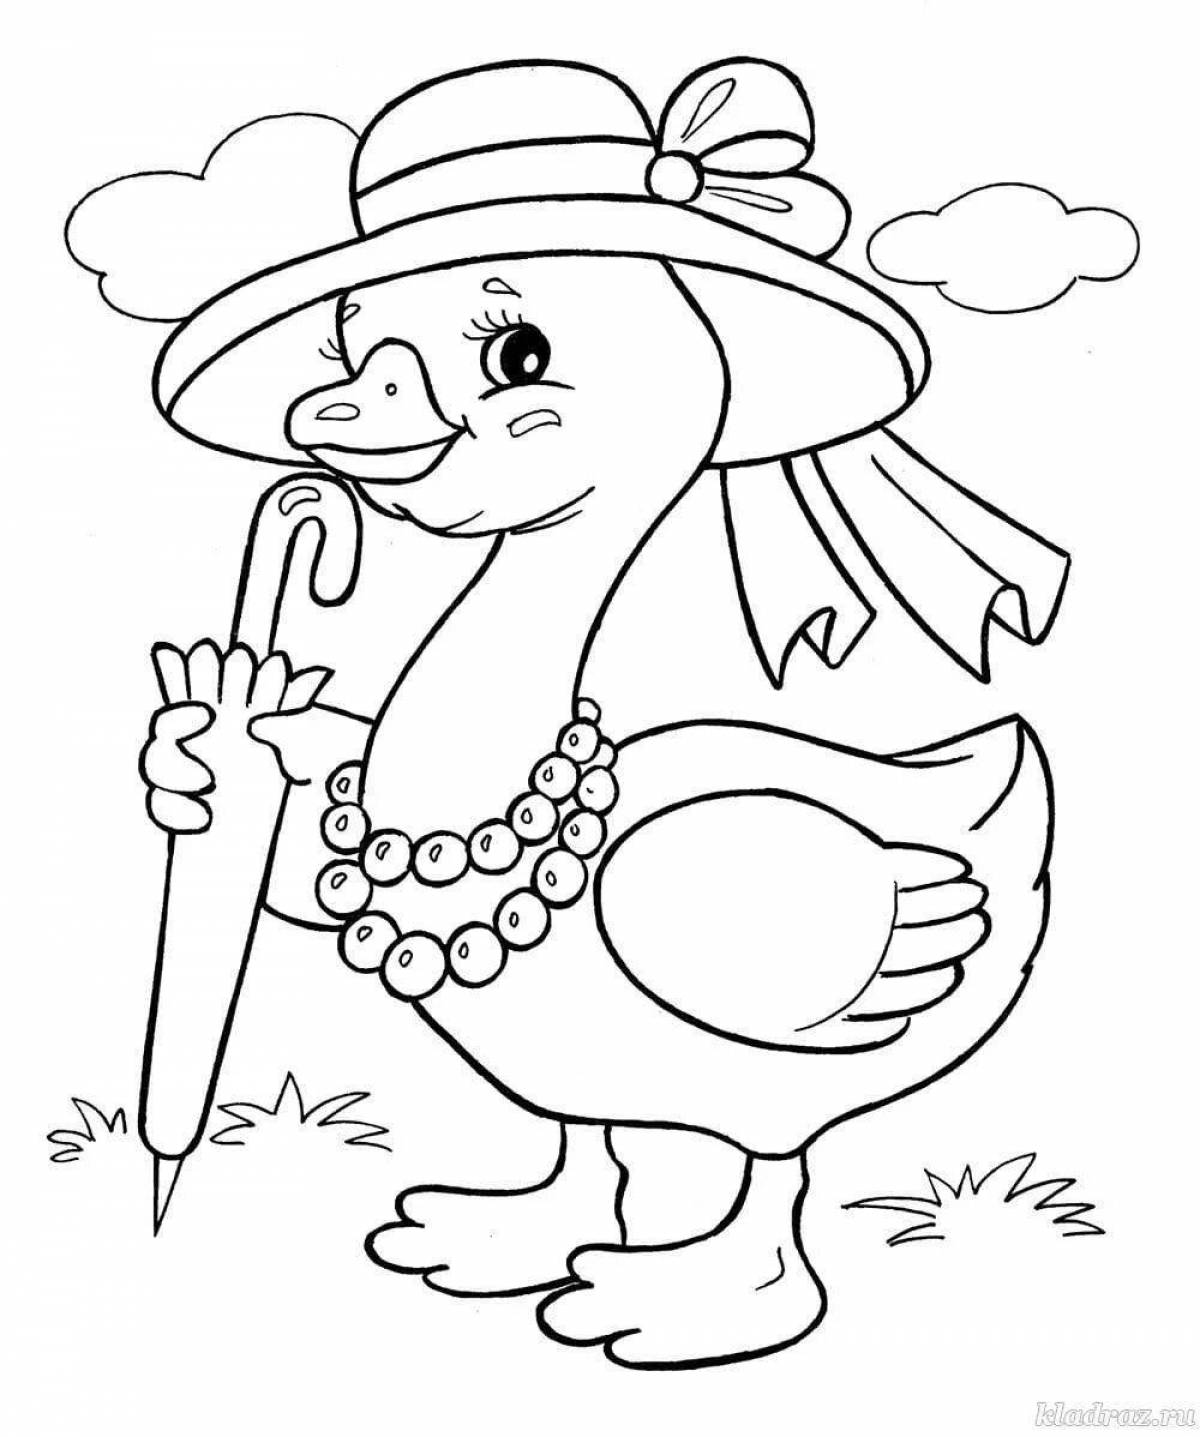 Creative coloring book for little kids